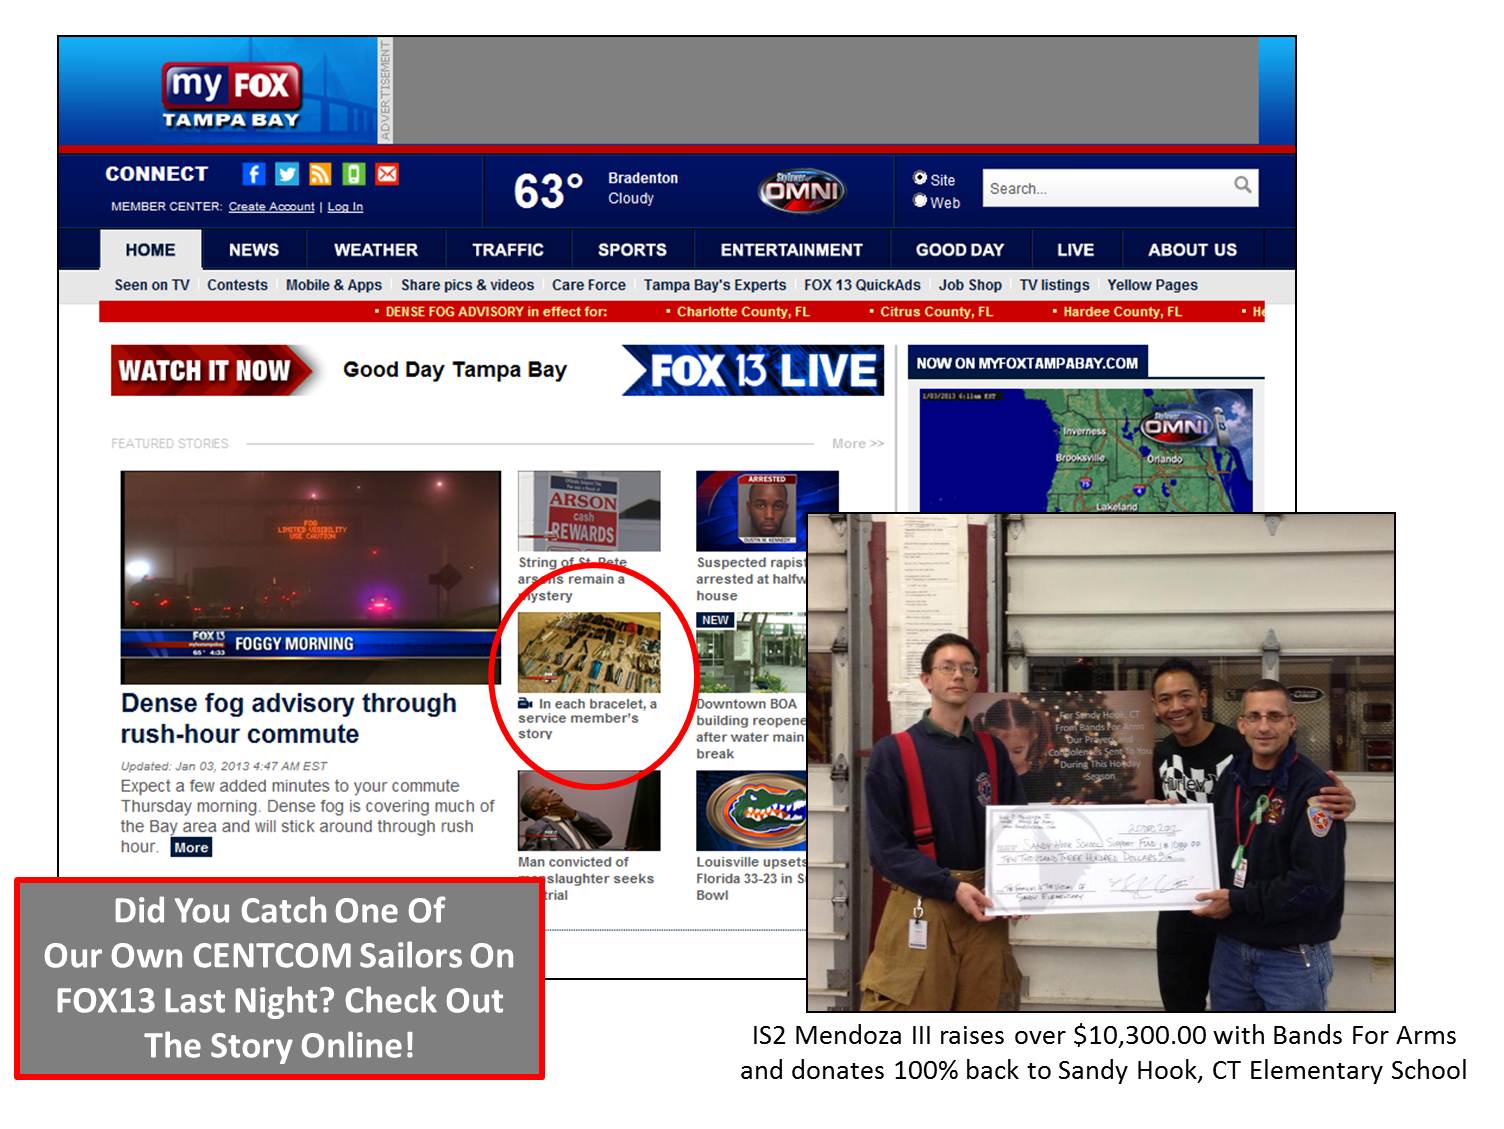 FOX13 News Interview with Bands For Arms Owner, Nicanor P. Mendoza III and donation of $10,300.00 to Sandy Hook Elementary School Relief Fund